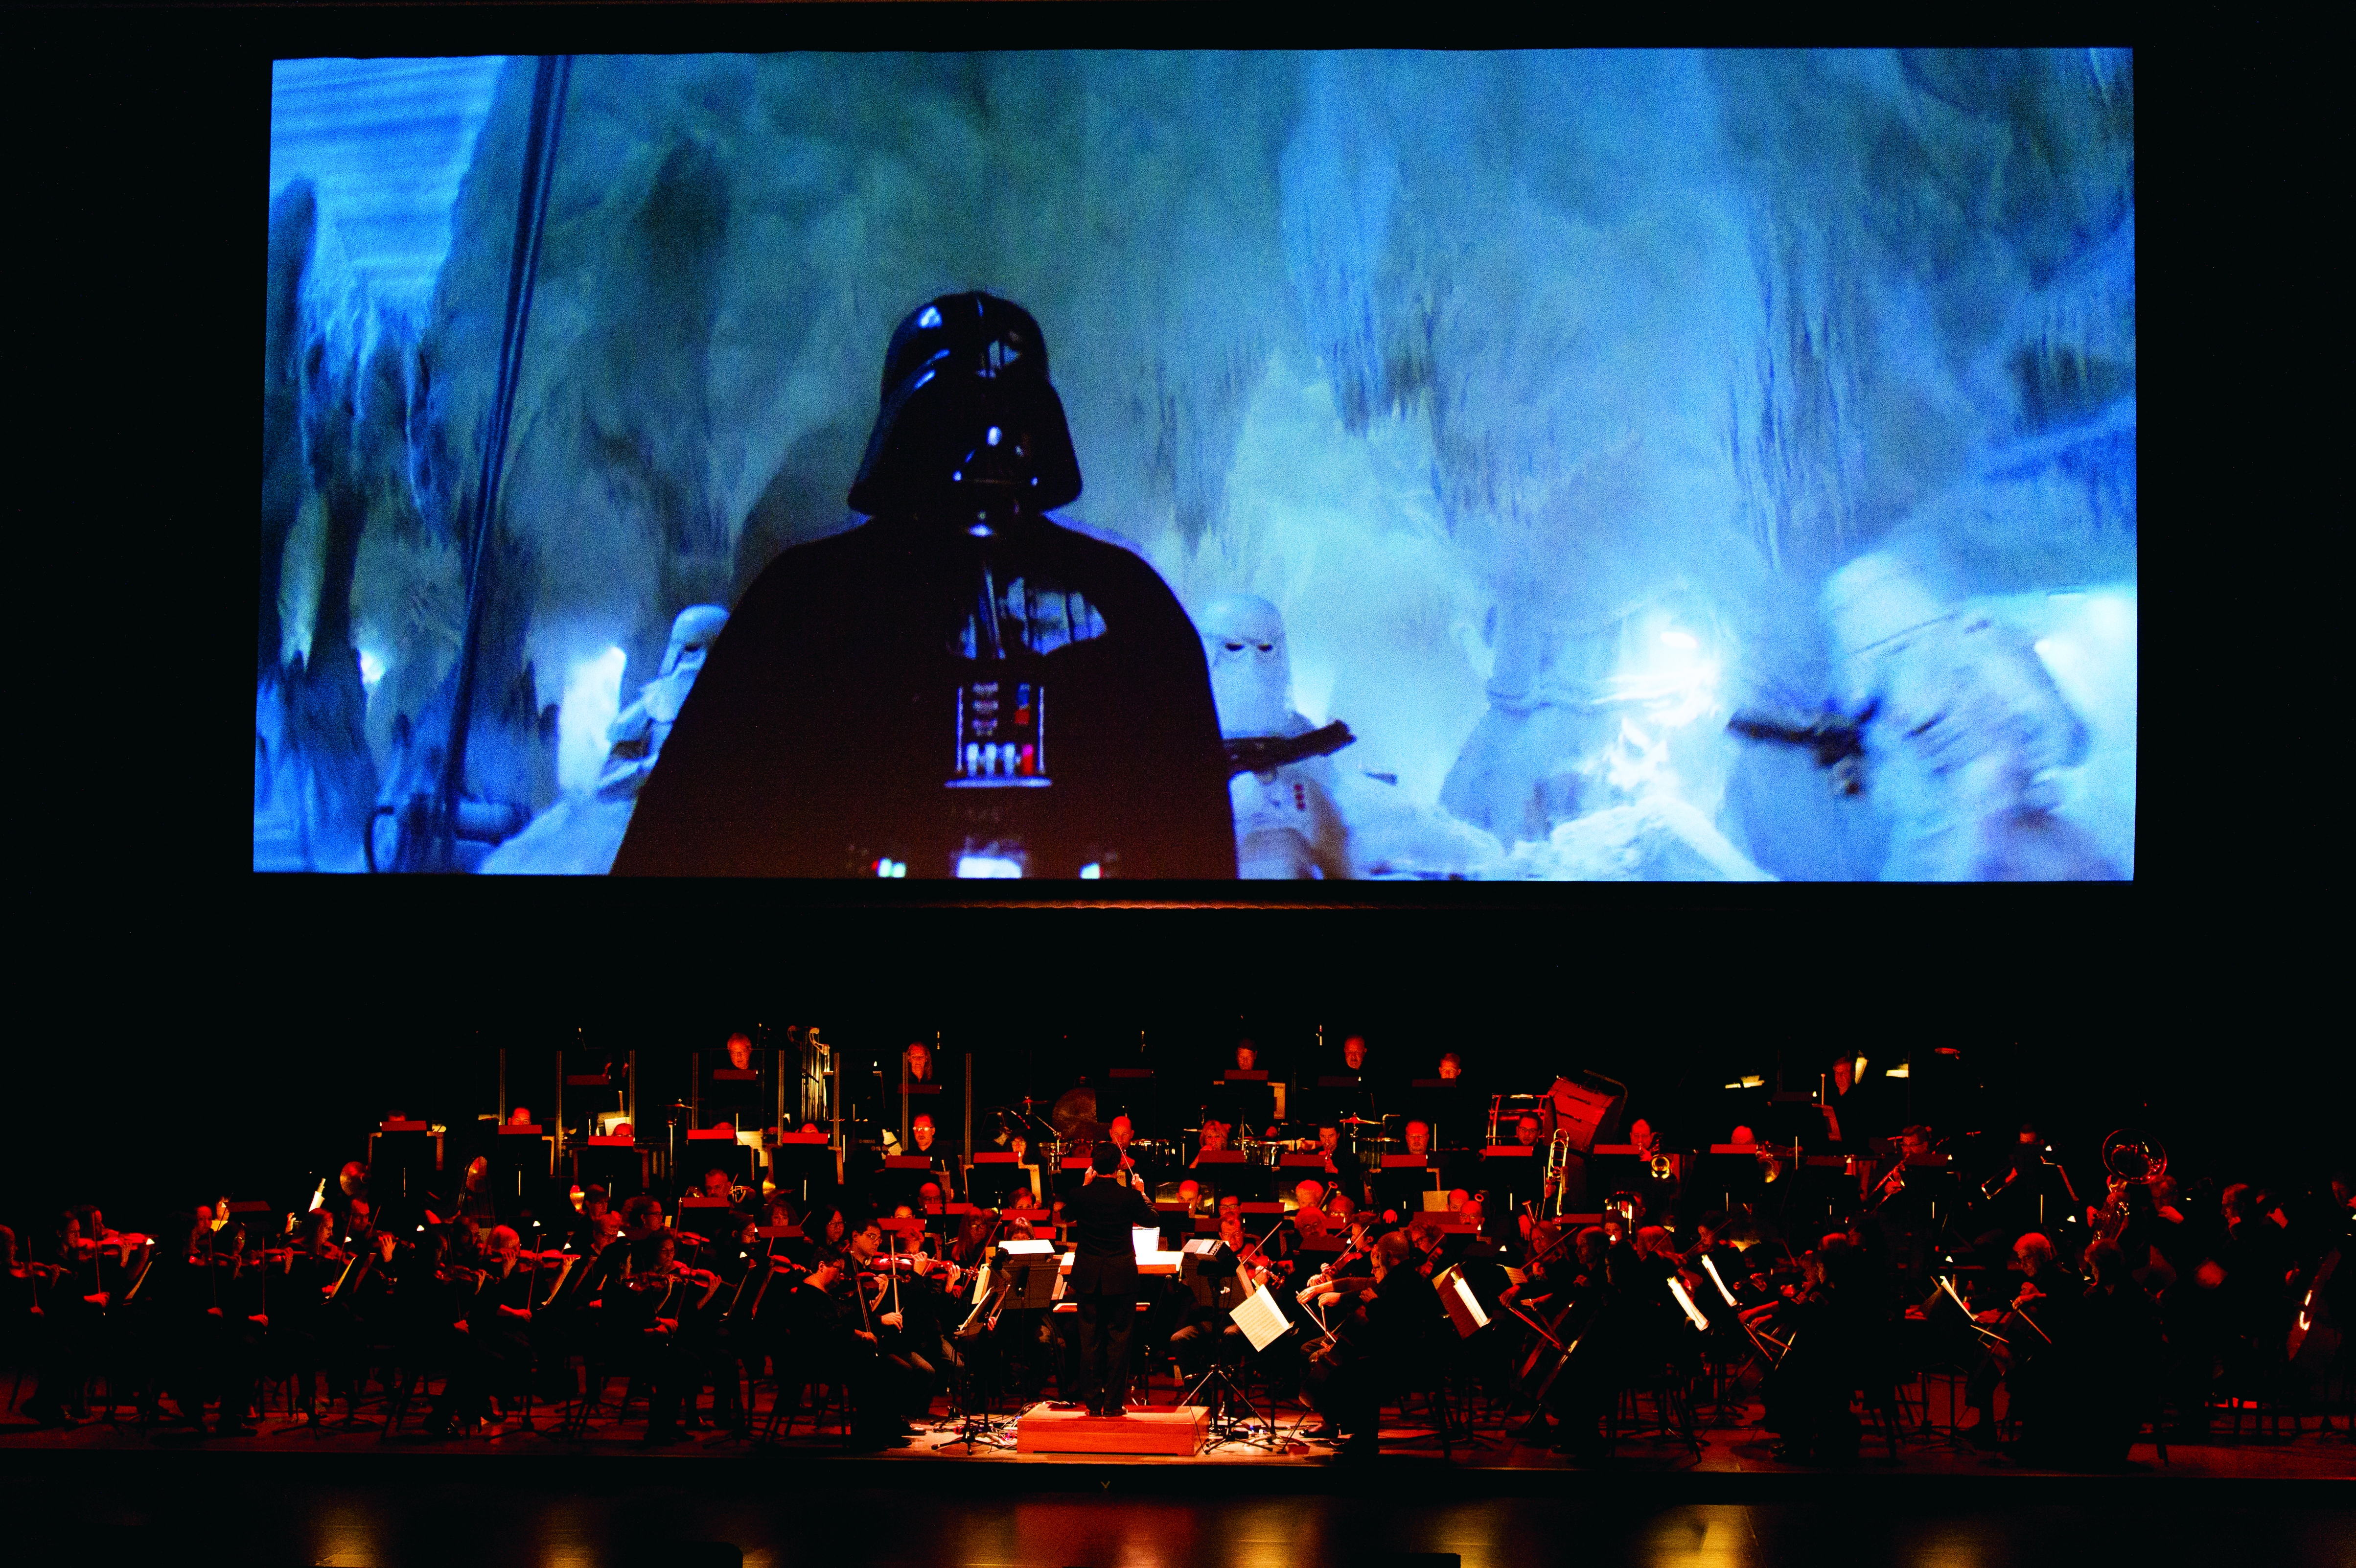 Soundtracks Onstage: Local symphonies beat surround sound by scoring films live